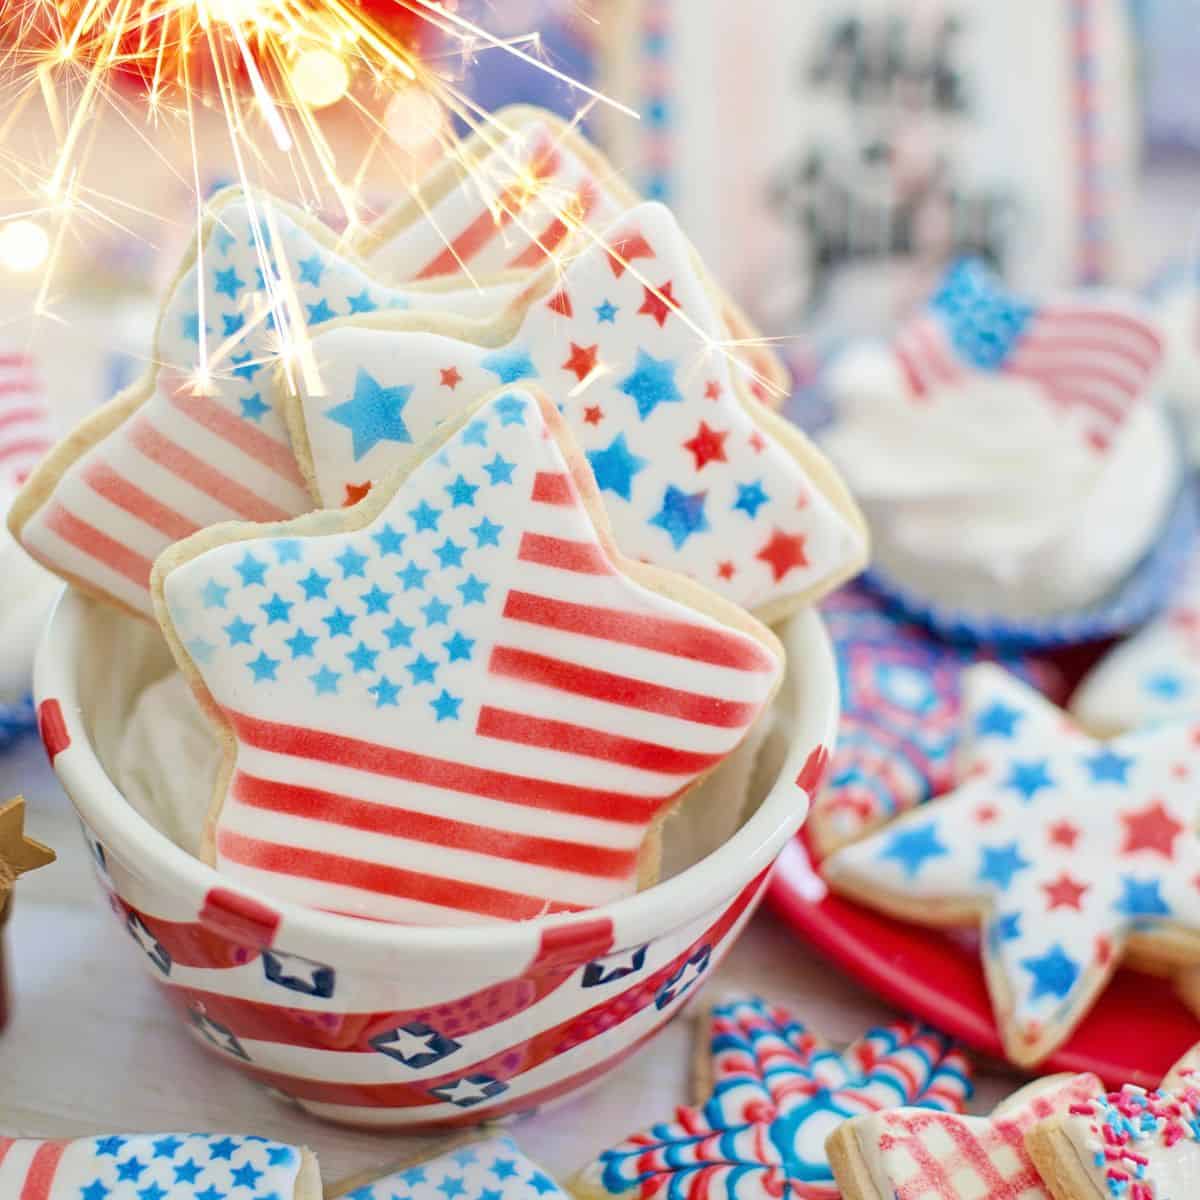 Red white and blue patriotic cookies on table.